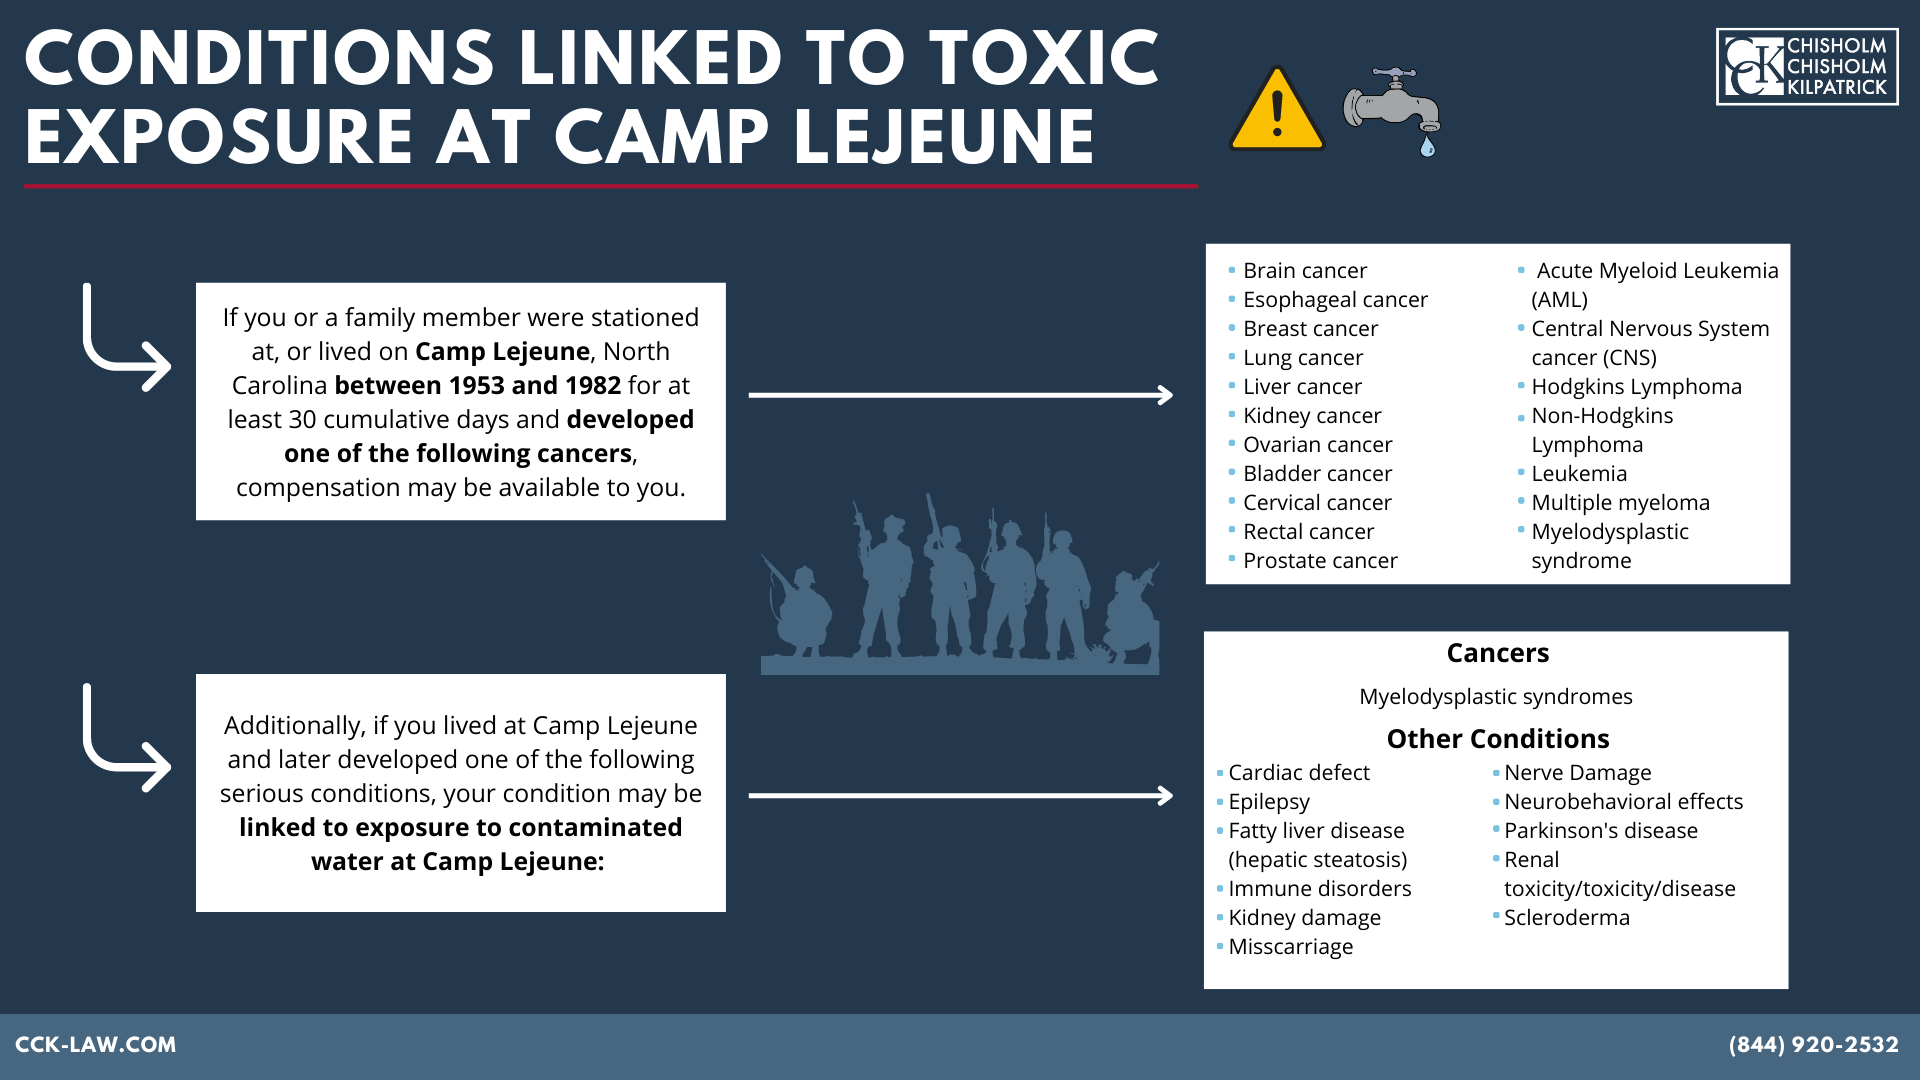 Camp Lejeune Conditions for class action lawsuit based on contaminated water exposure due to PACT Act passage